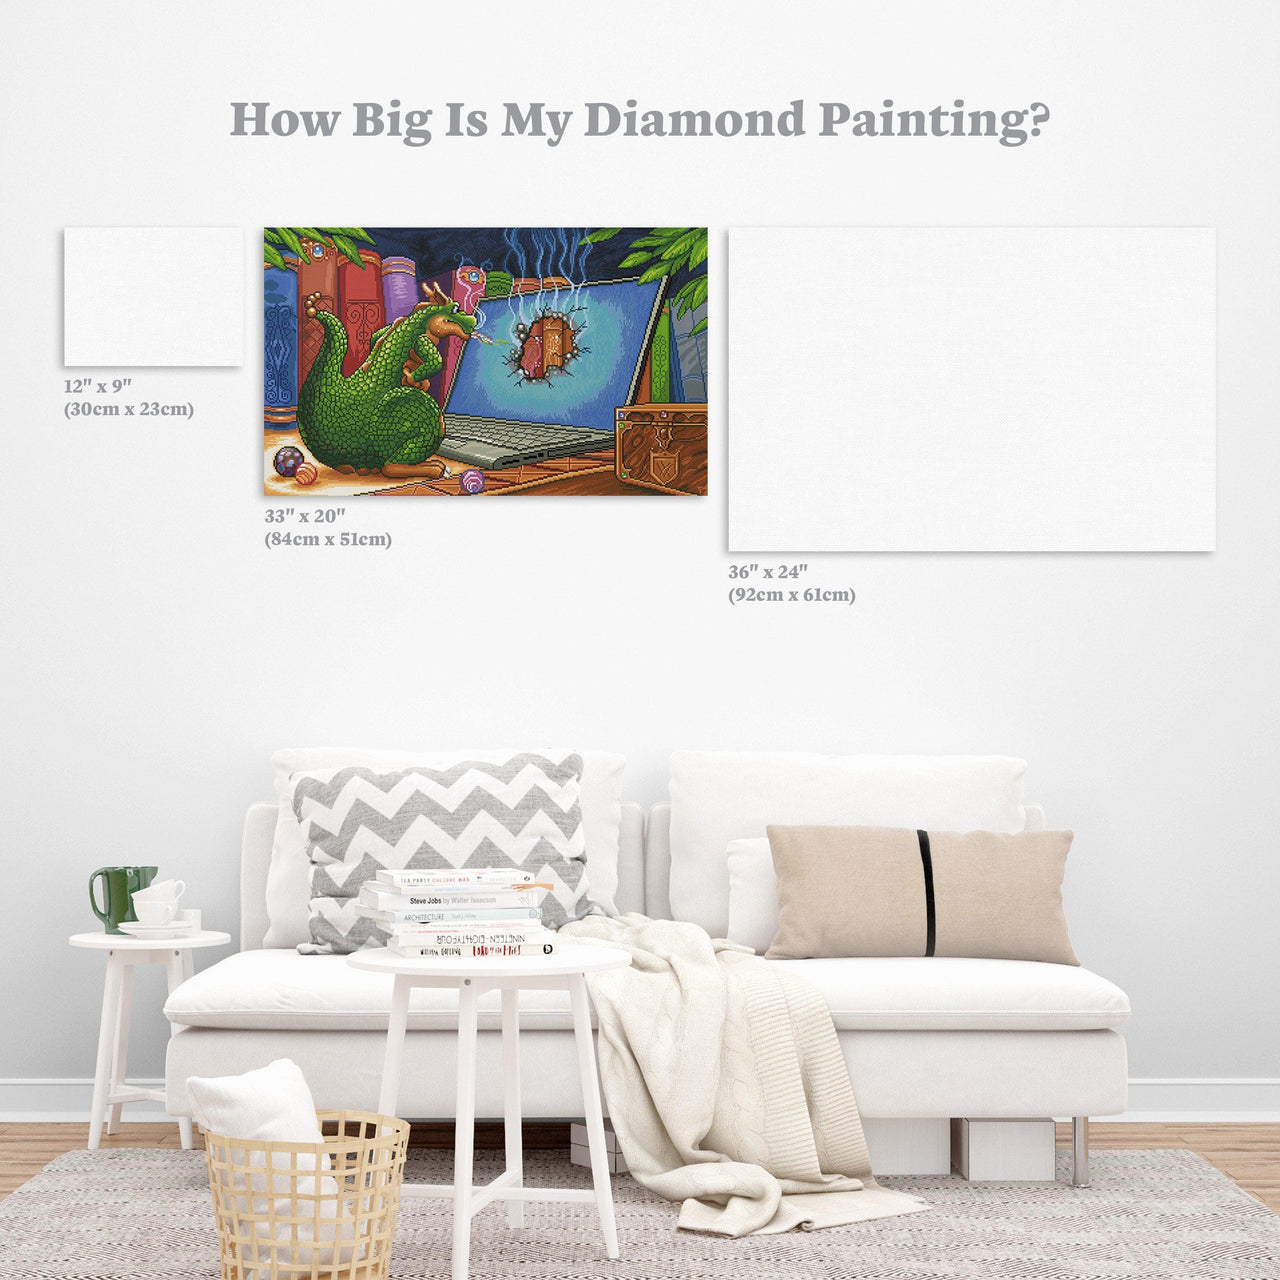 Diamond Painting Technology Meltdown 33.0" x 20.0″ (84cm x 51cm) / Square with 57 Colors including 3 ABs / 66,732